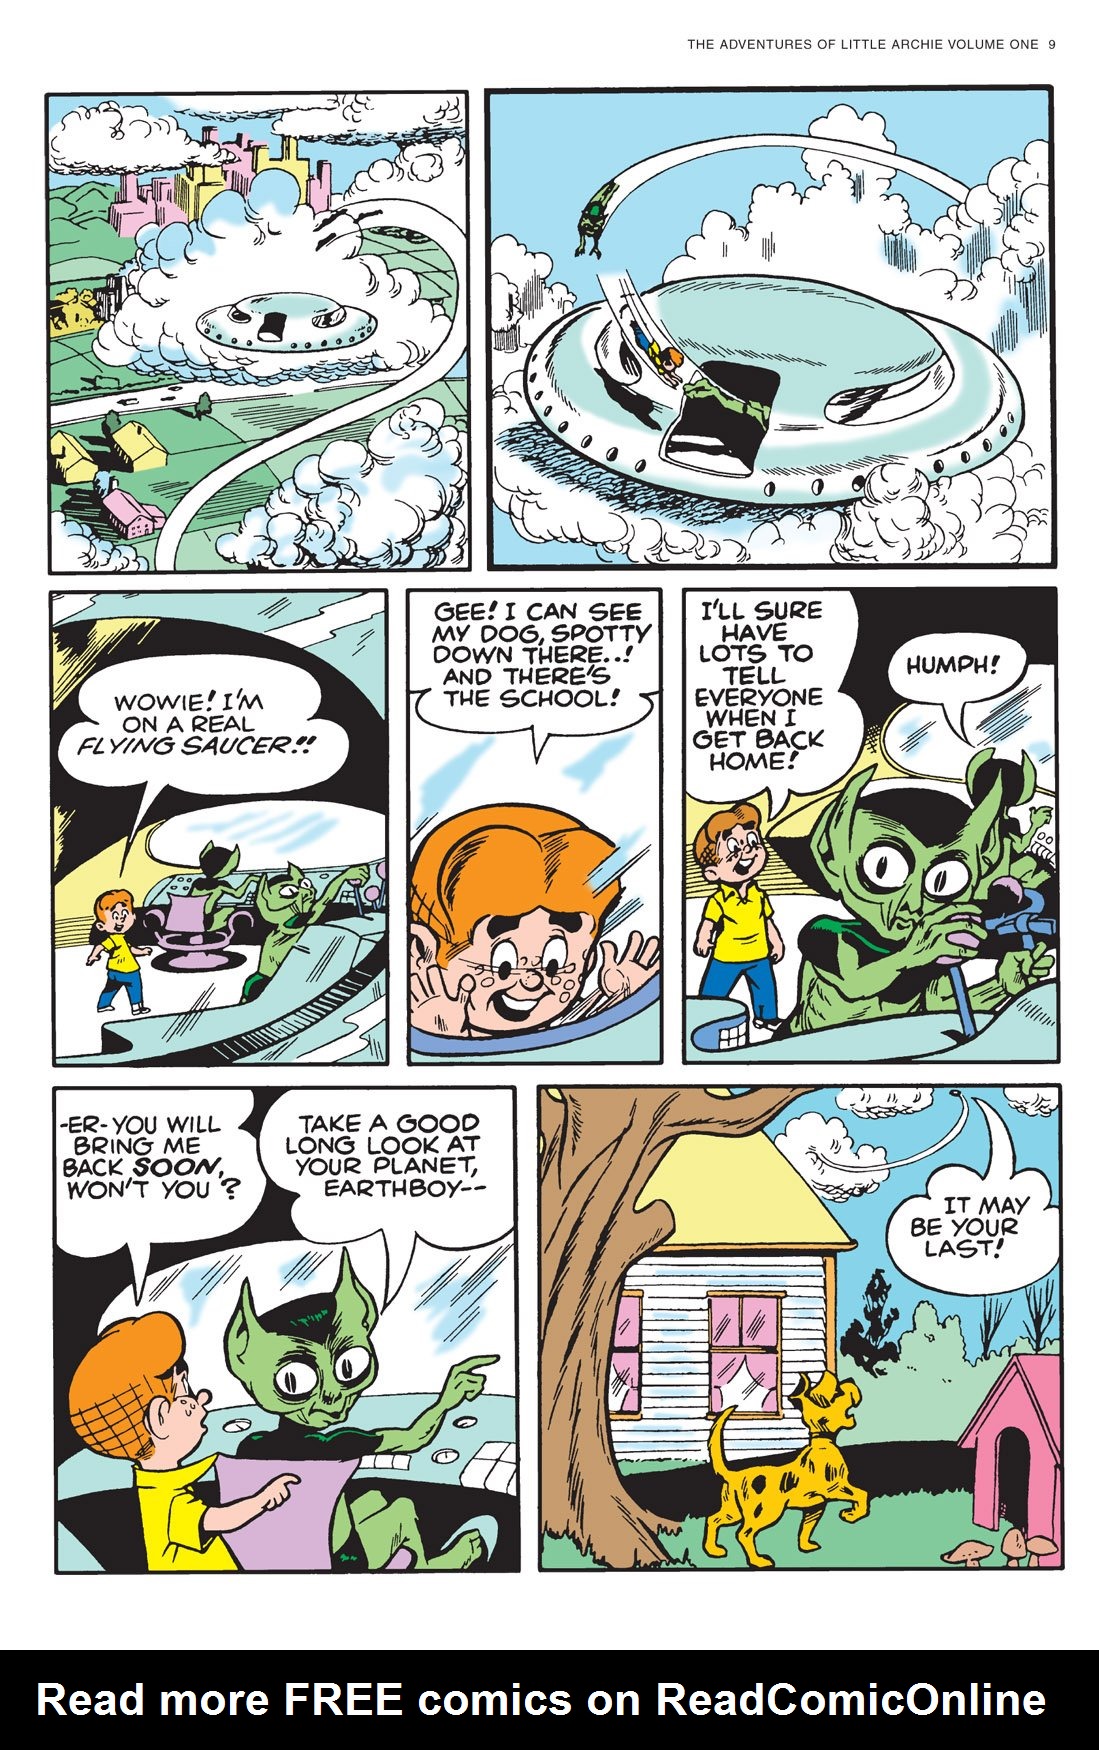 Read online Adventures of Little Archie comic -  Issue # TPB 1 - 10